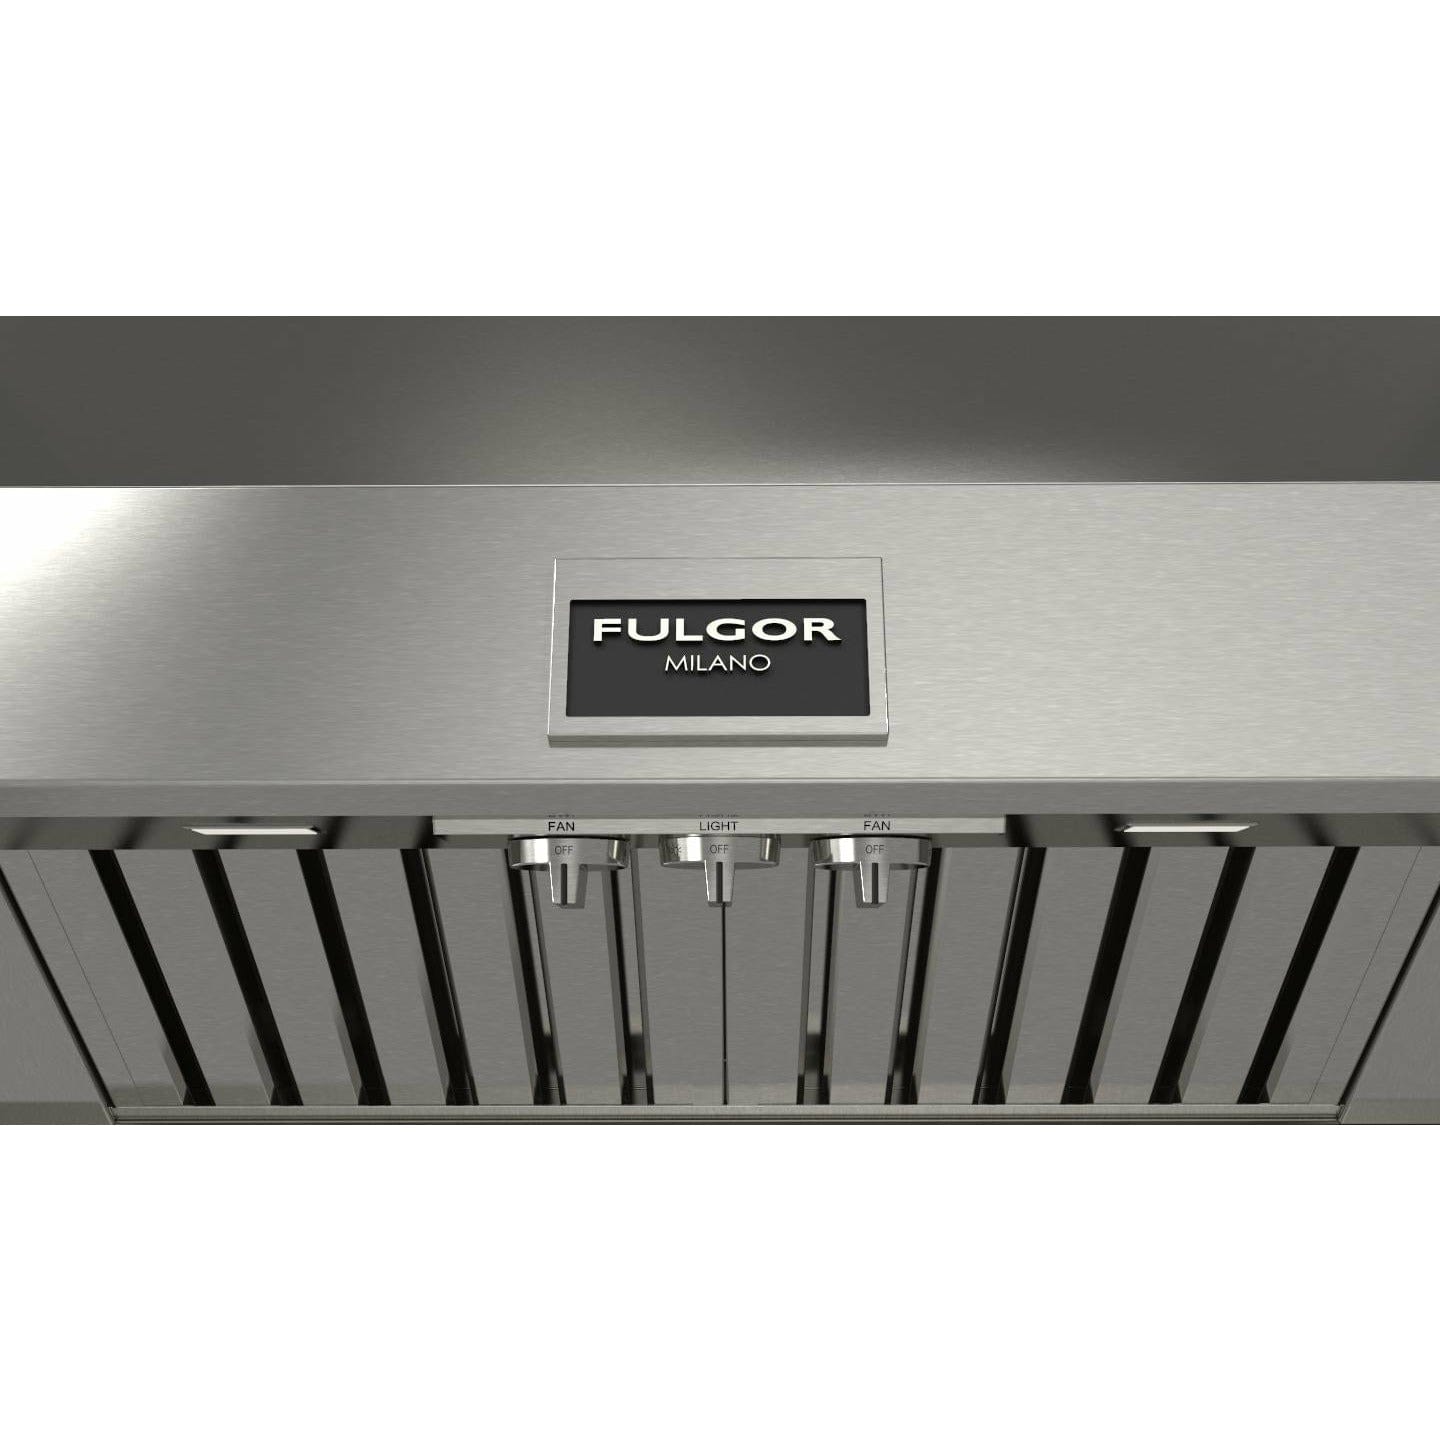 Fulgor Milano 36" Professional Hood - 1000 CFM, Stainless Steel - F6PH36DS1 Hoods F6PH36DS1 Luxury Appliances Direct